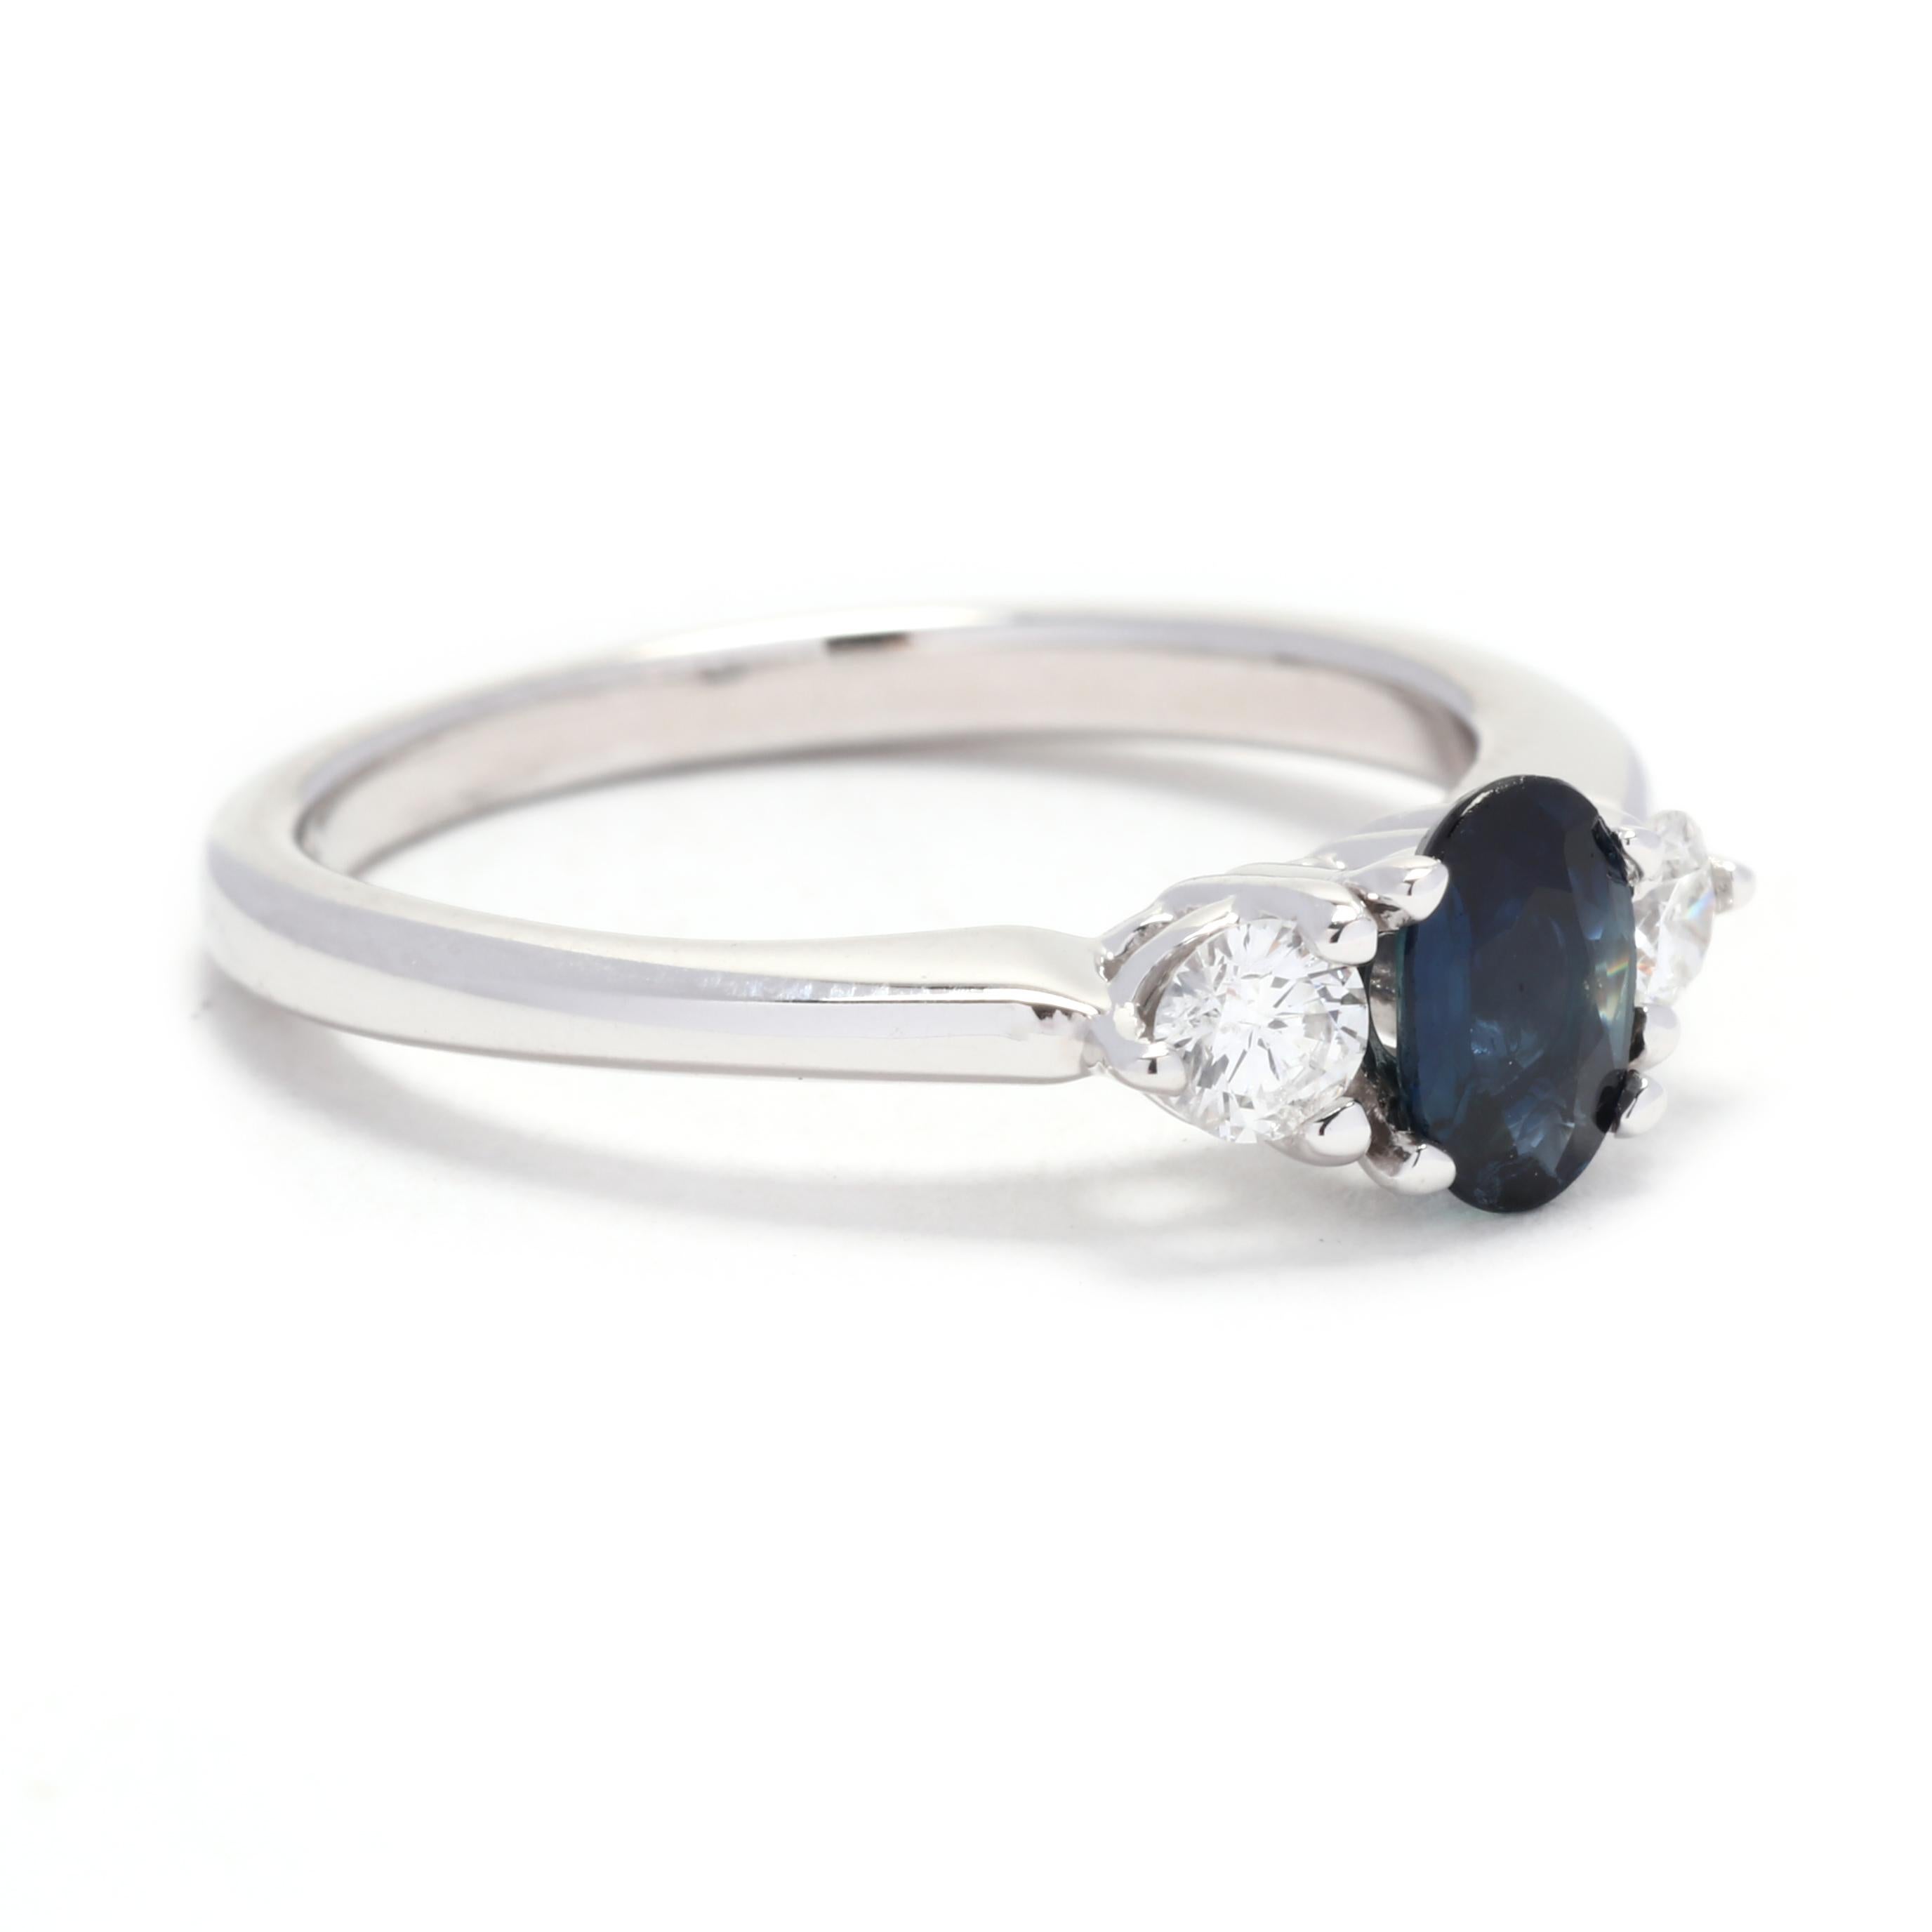 This exquisite 3 stone engagement ring is a timeless symbol of love and commitment. Crafted in 14K white gold, this ring features 0.90 carat sapphires and diamonds. The sapphire and diamonds are of excellent quality, with a color grade of G and a